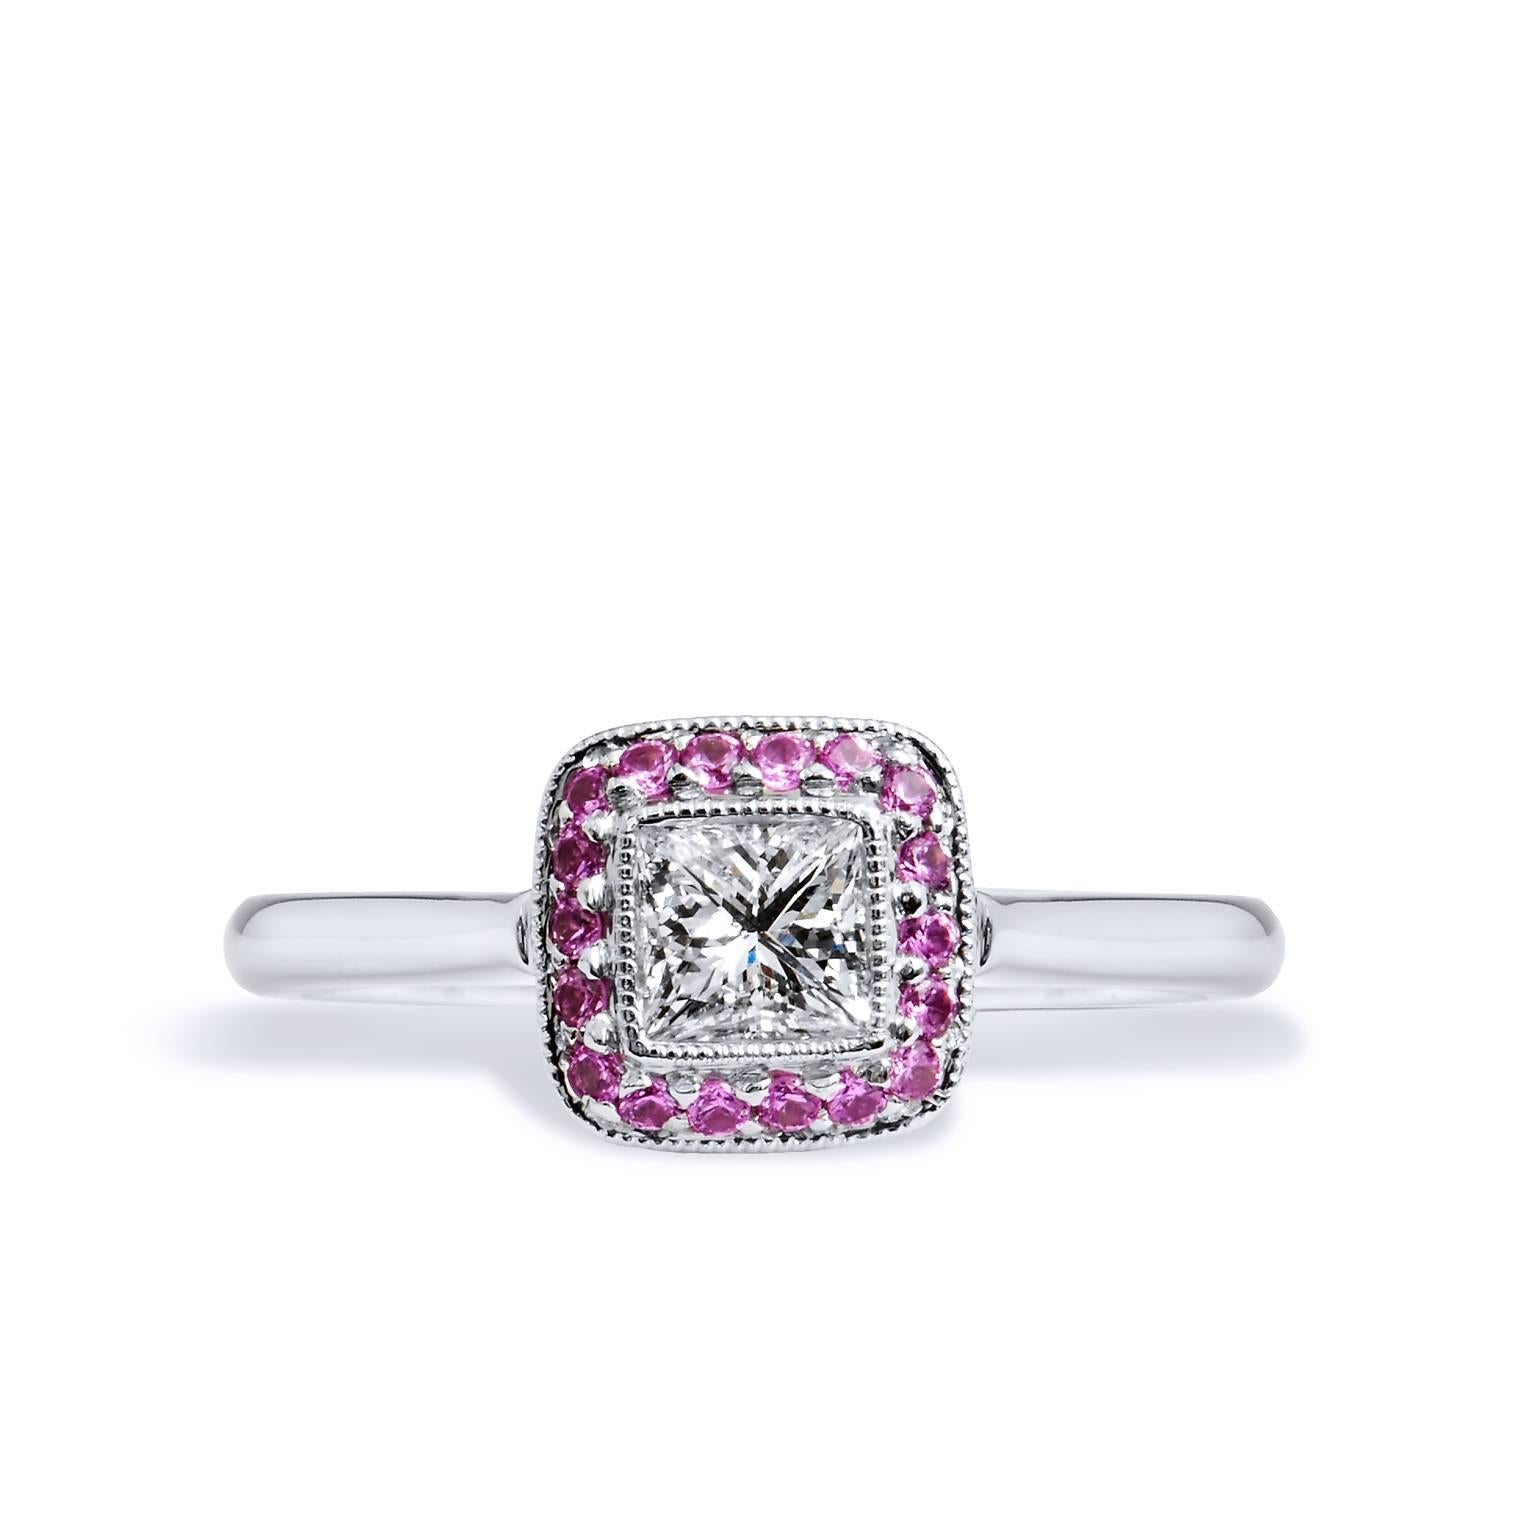 Handmade Diamond and Pink Sapphire Halo 18 karat White Gold Engagement Ring

Handcrafted in 18 karat white gold, this ring features a .40 carat E-F SI2 graded diamond. The center diamonds is embraced by 18 piece pave set natural hot pink sapphires.